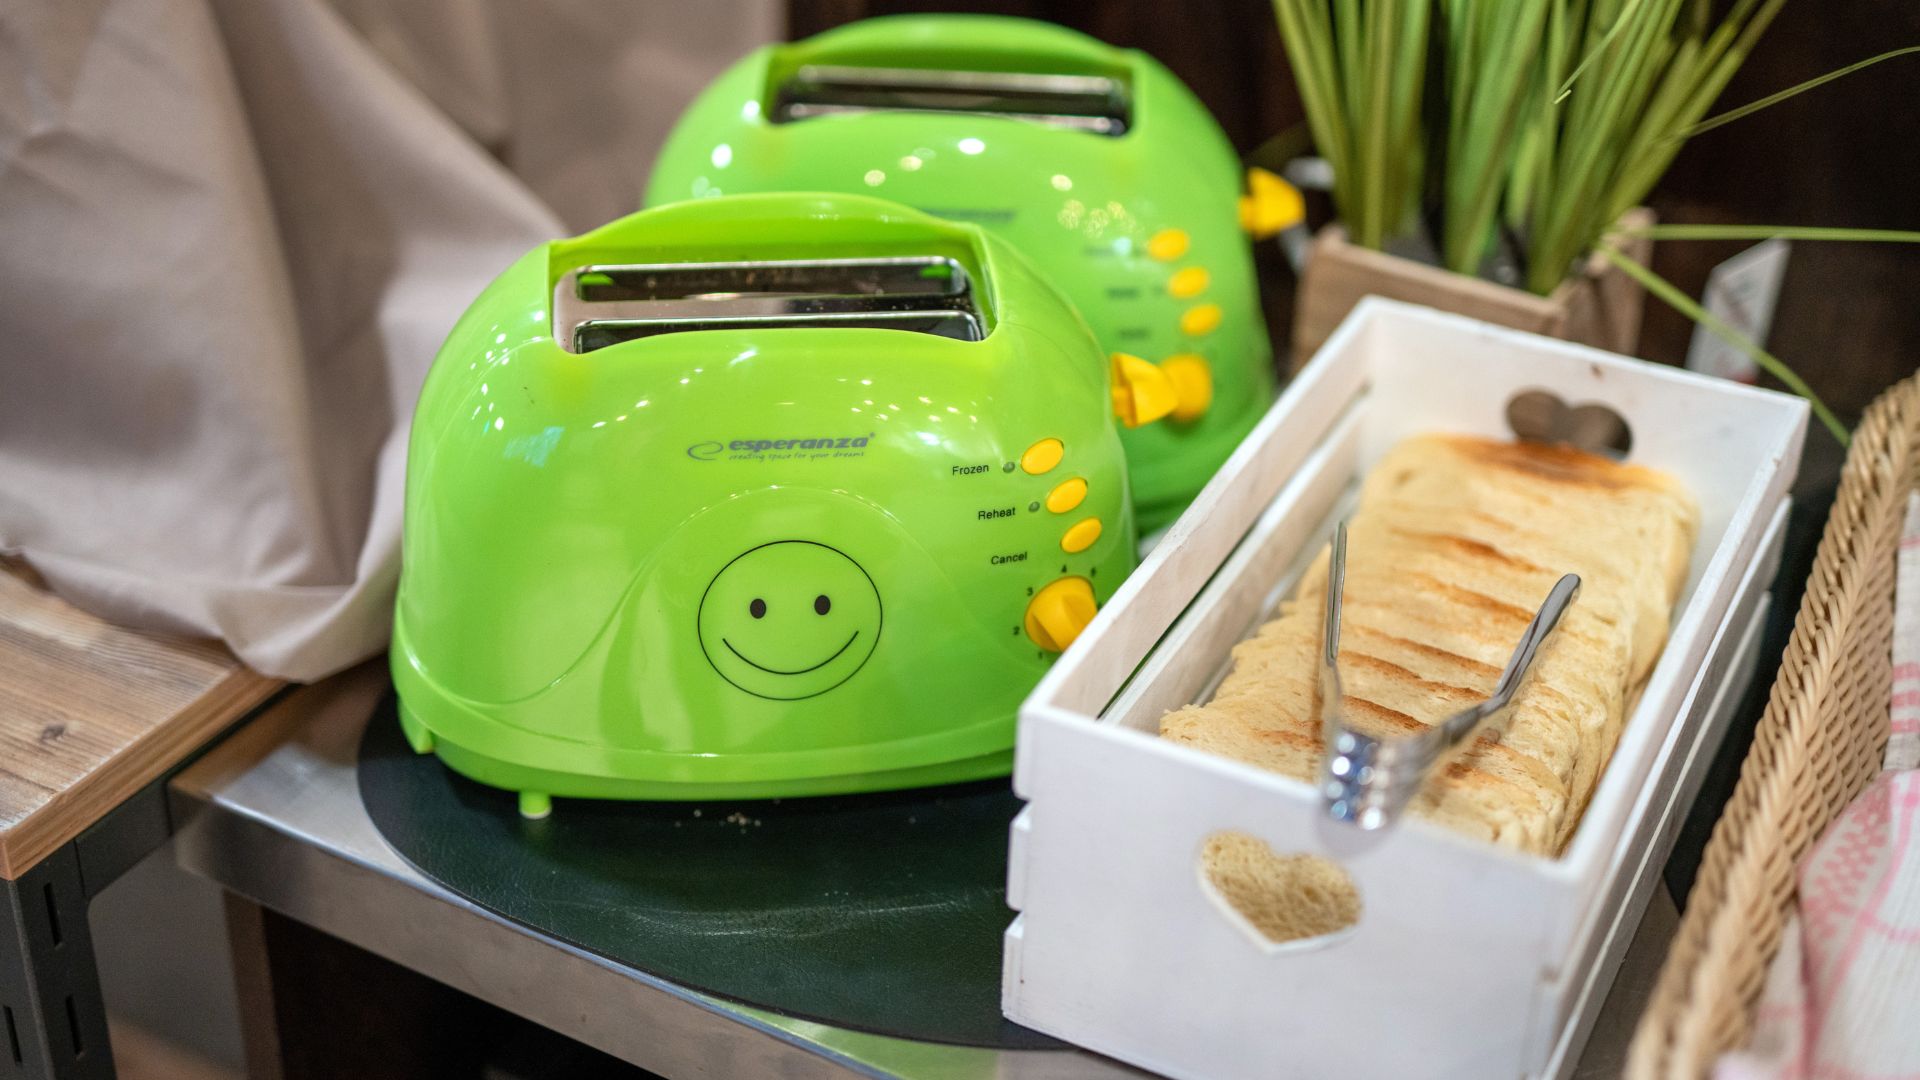 Add a smile to your toast at breakfast!